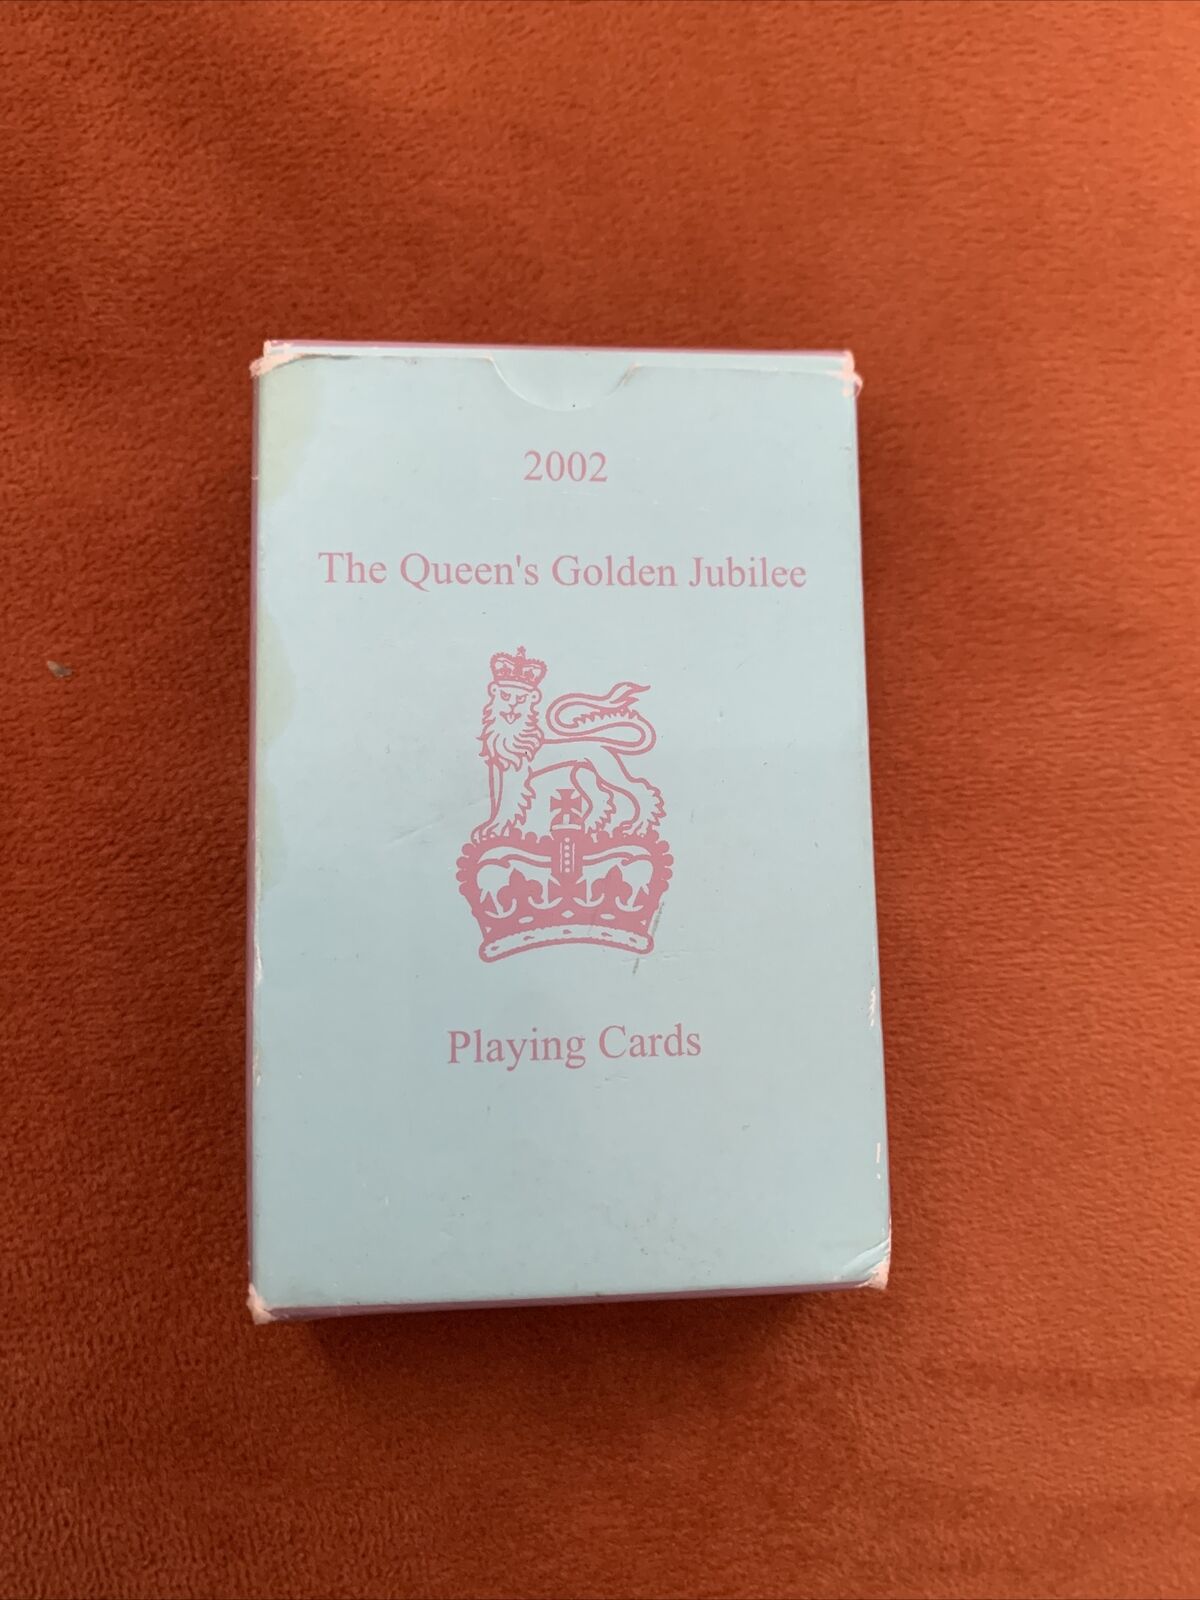 The Queen’s Golden Jubilee 2002 Playing Cards Sealed New Full Deck